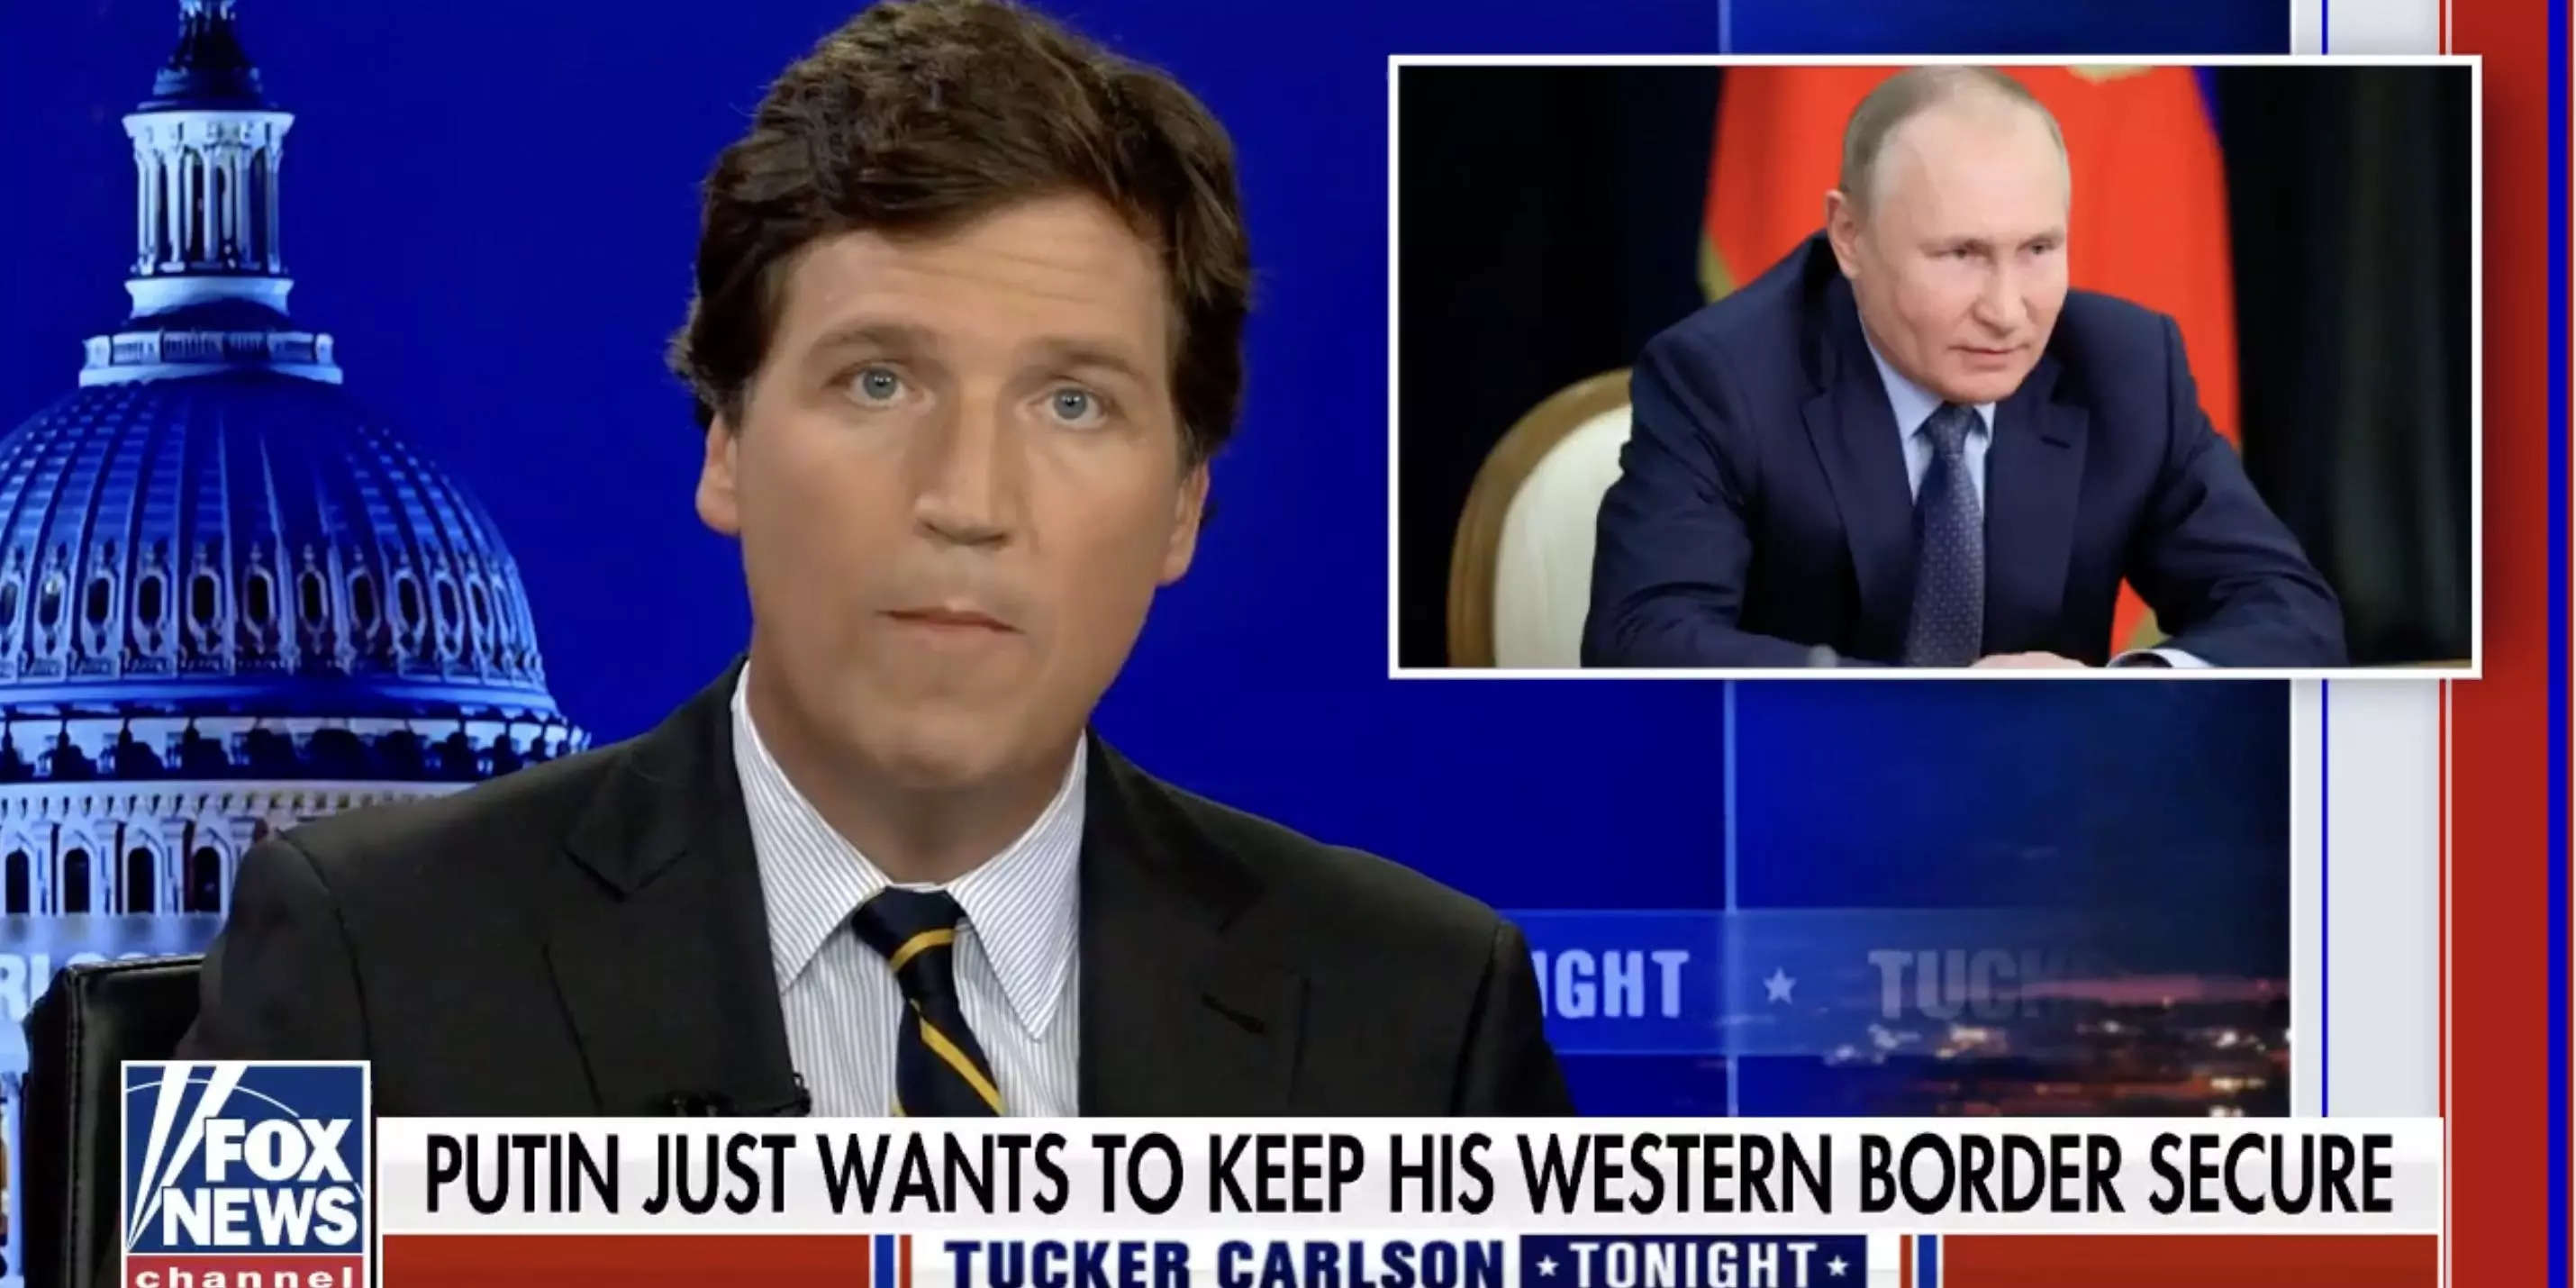 tucker-carlson-told-the-new-york-times-hes-not-a-russian-agent-amid-controversy-over-his-pro-kremlin-stance.jpg